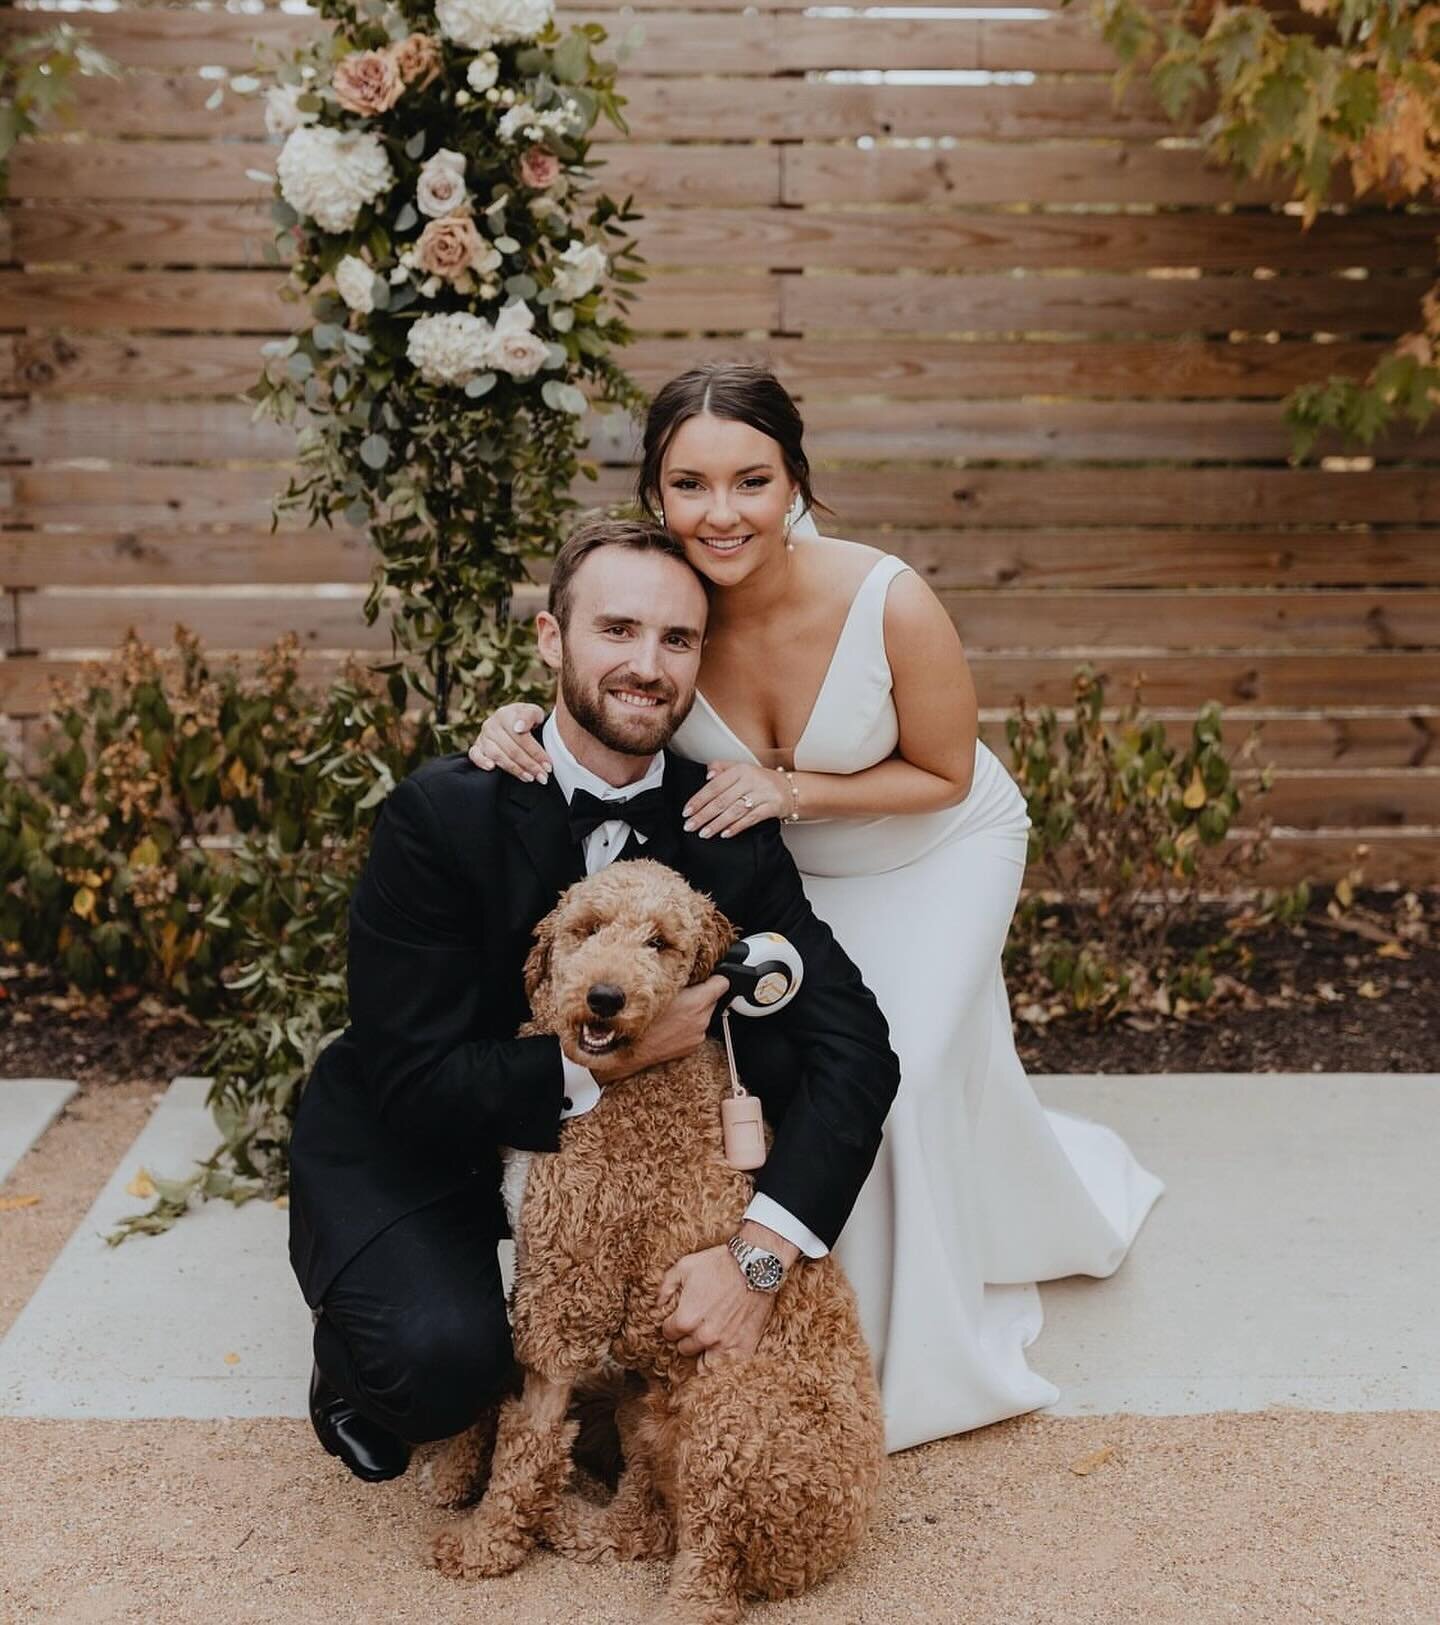 And the three of them lived happily ever aft-FUR 💍🐾❤️

We love seeing the excitement on all the sweet fur babies faces when their parents get married! 

Schedule your private tour of @thefirehousekc today to begin planning your biggest day&hellip;b